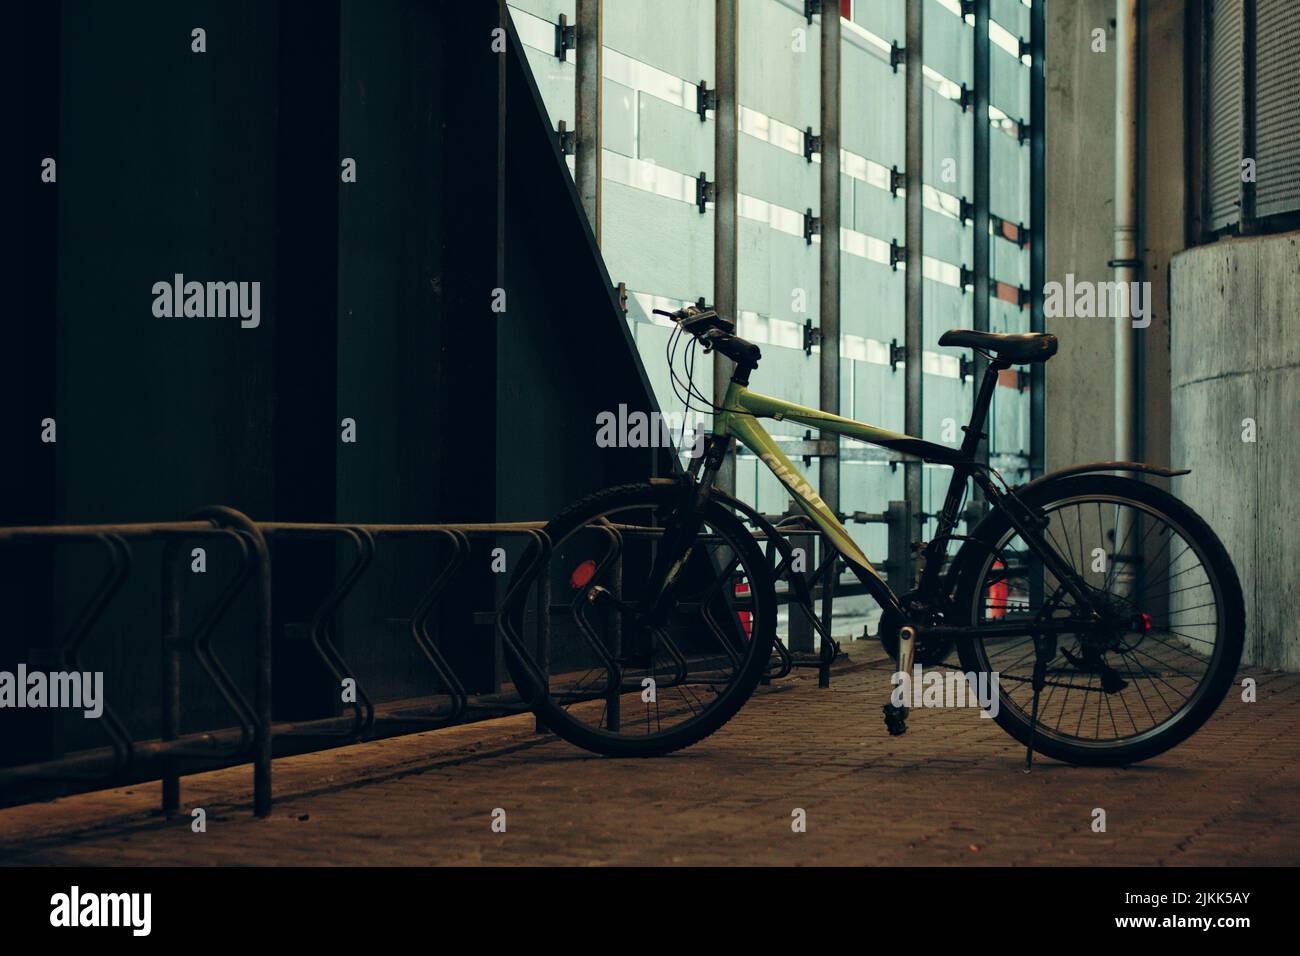 The yellow bicycle parked in the street. Stock Photo